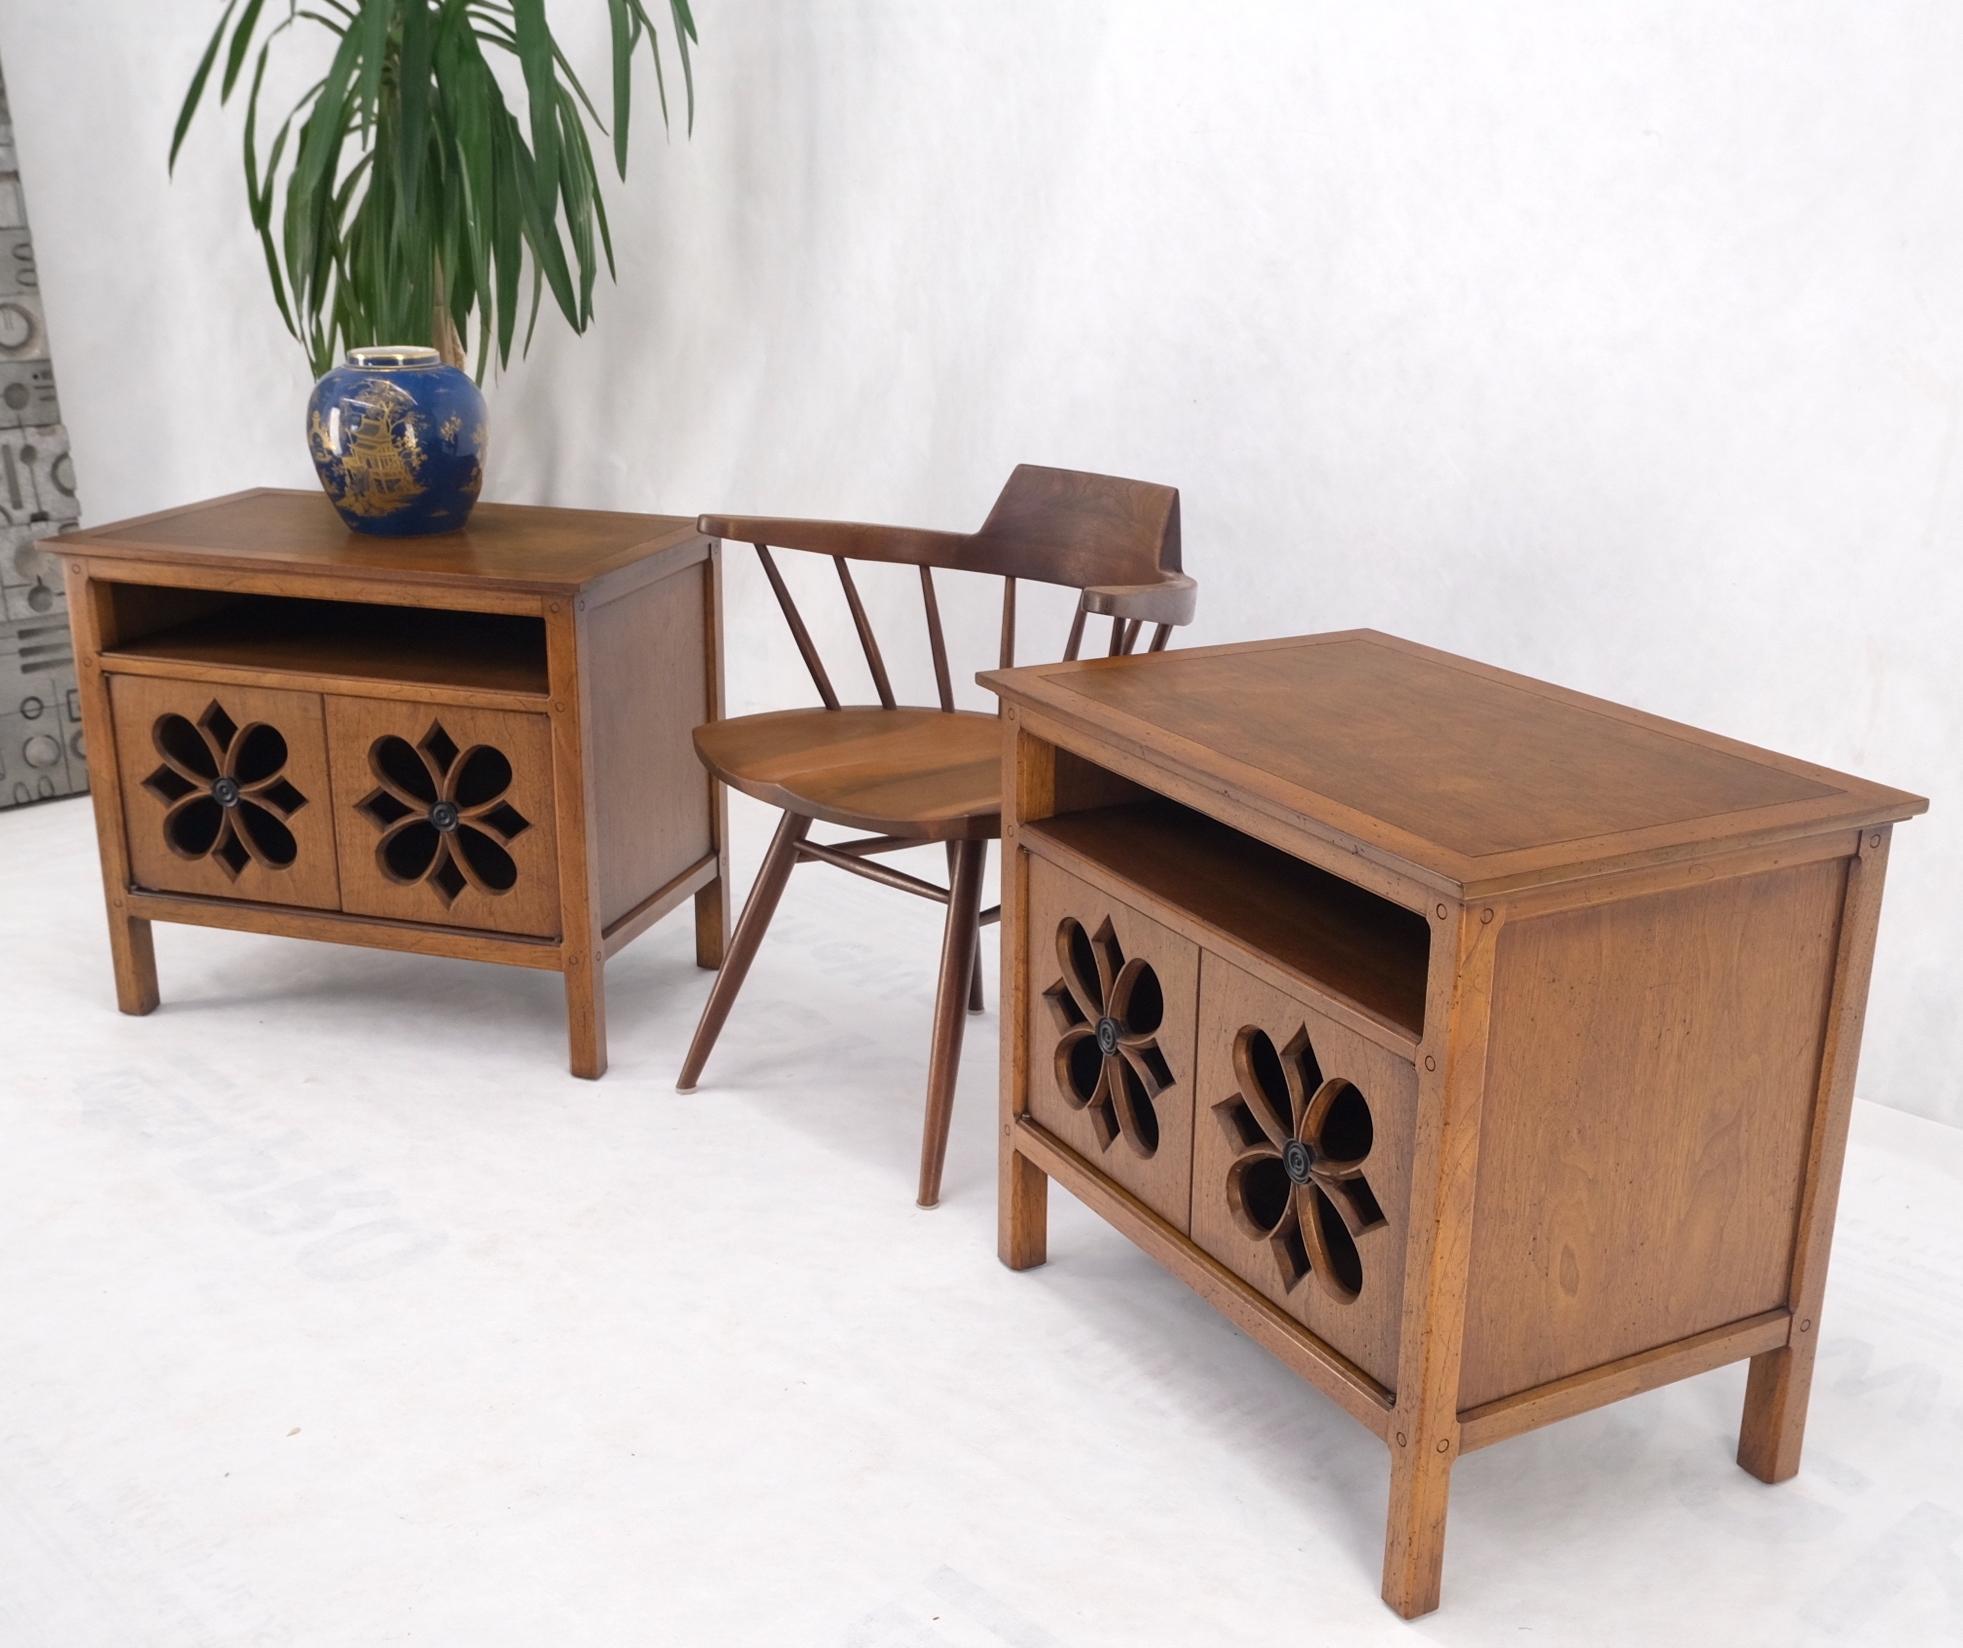 Pair double door pierced carved doors compartment night stands end tables mint!